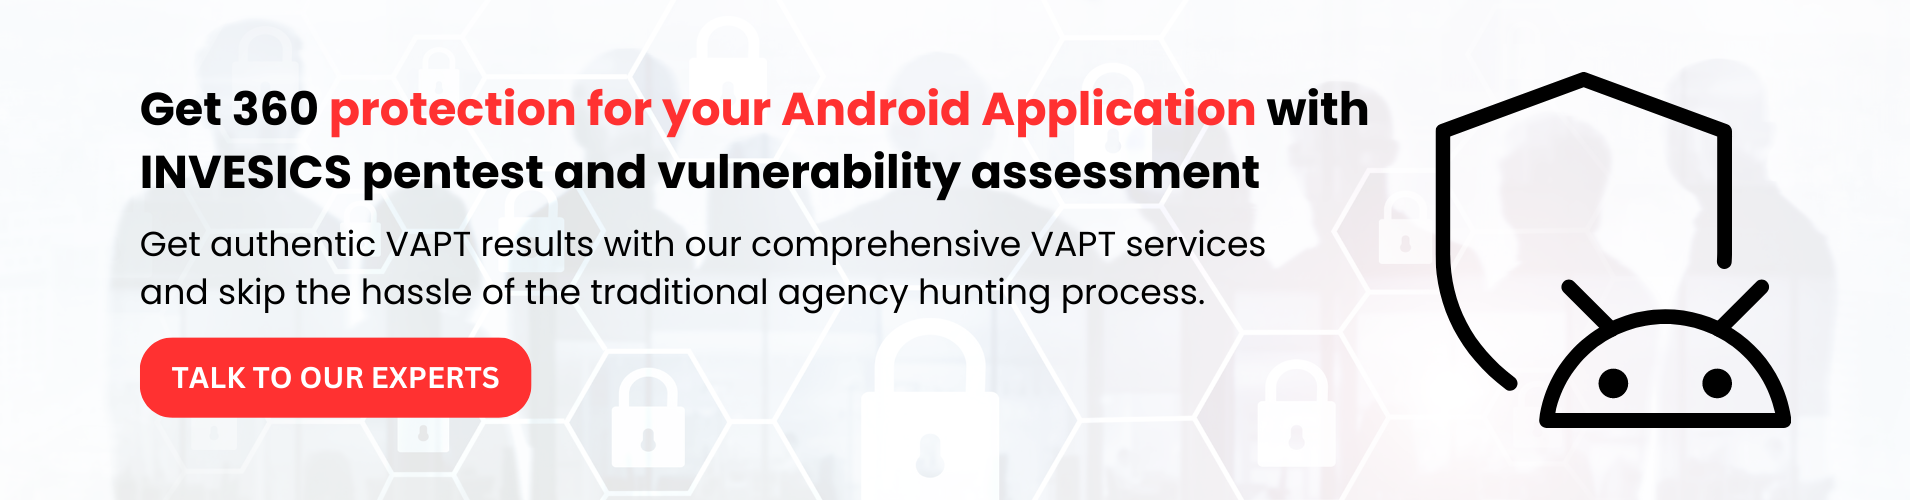 Android Application security, mobile app VAPT, cyber security company in India